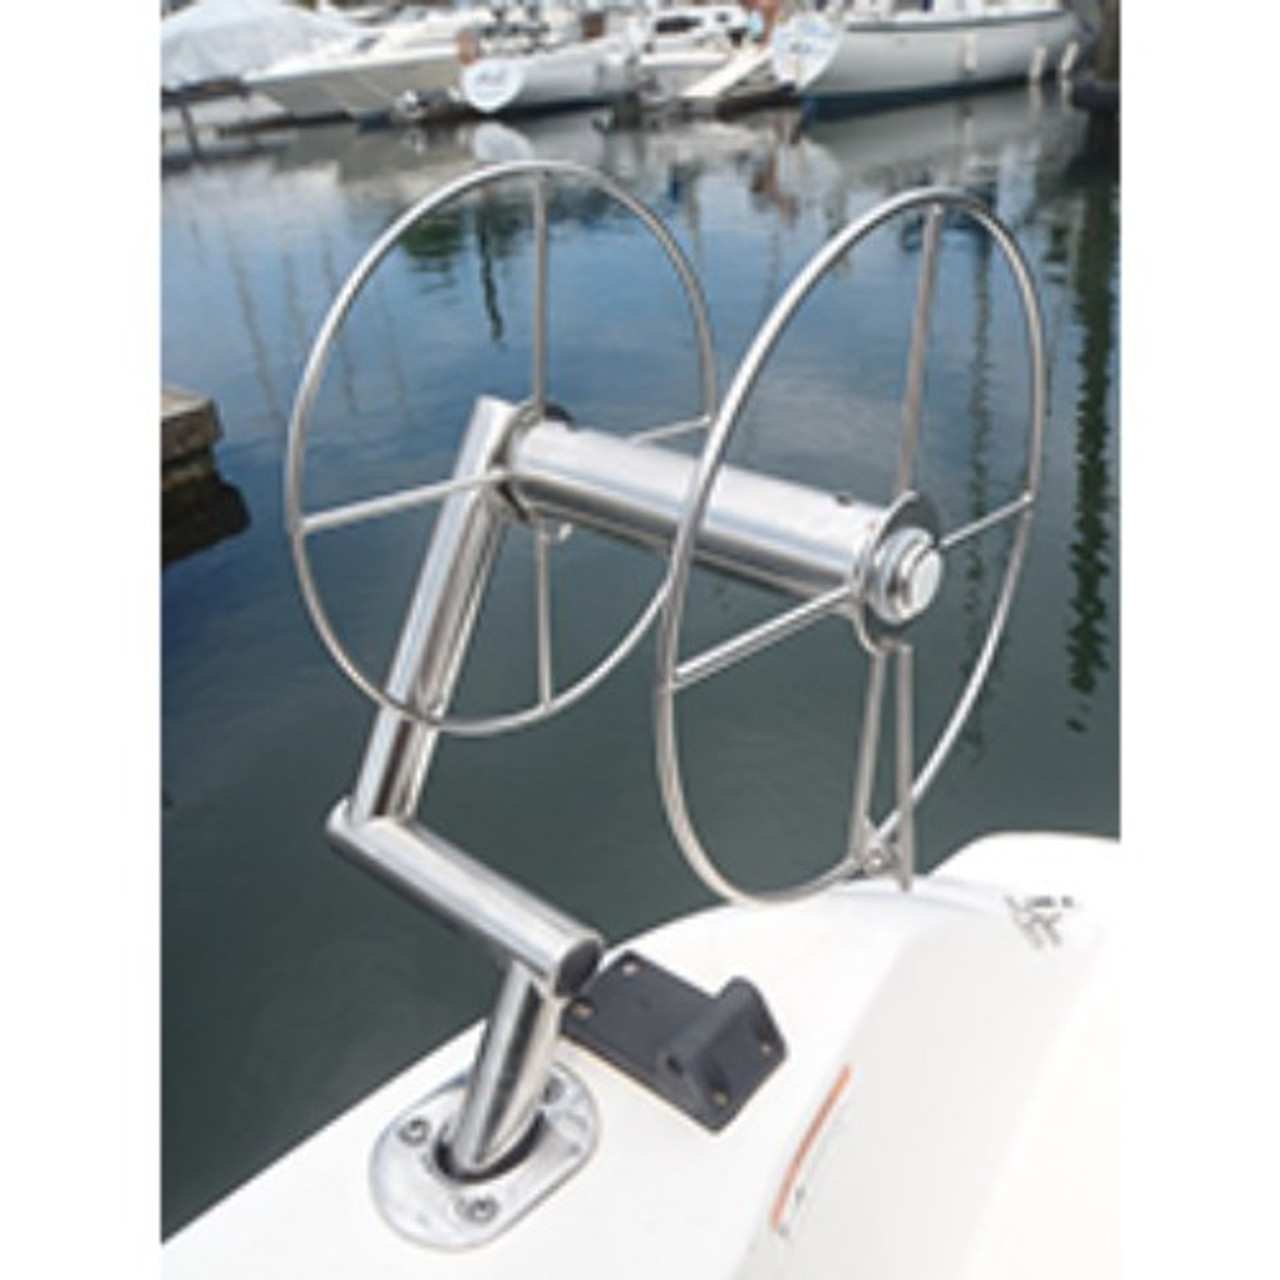 https://cdn11.bigcommerce.com/s-juamt7rae6/images/stencil/1280x1280/products/1994/2517/Shoreline-Rod-Holder-Stern-Reel-Reel-Only__25572.1626800219.jpg?c=1?imbypass=on